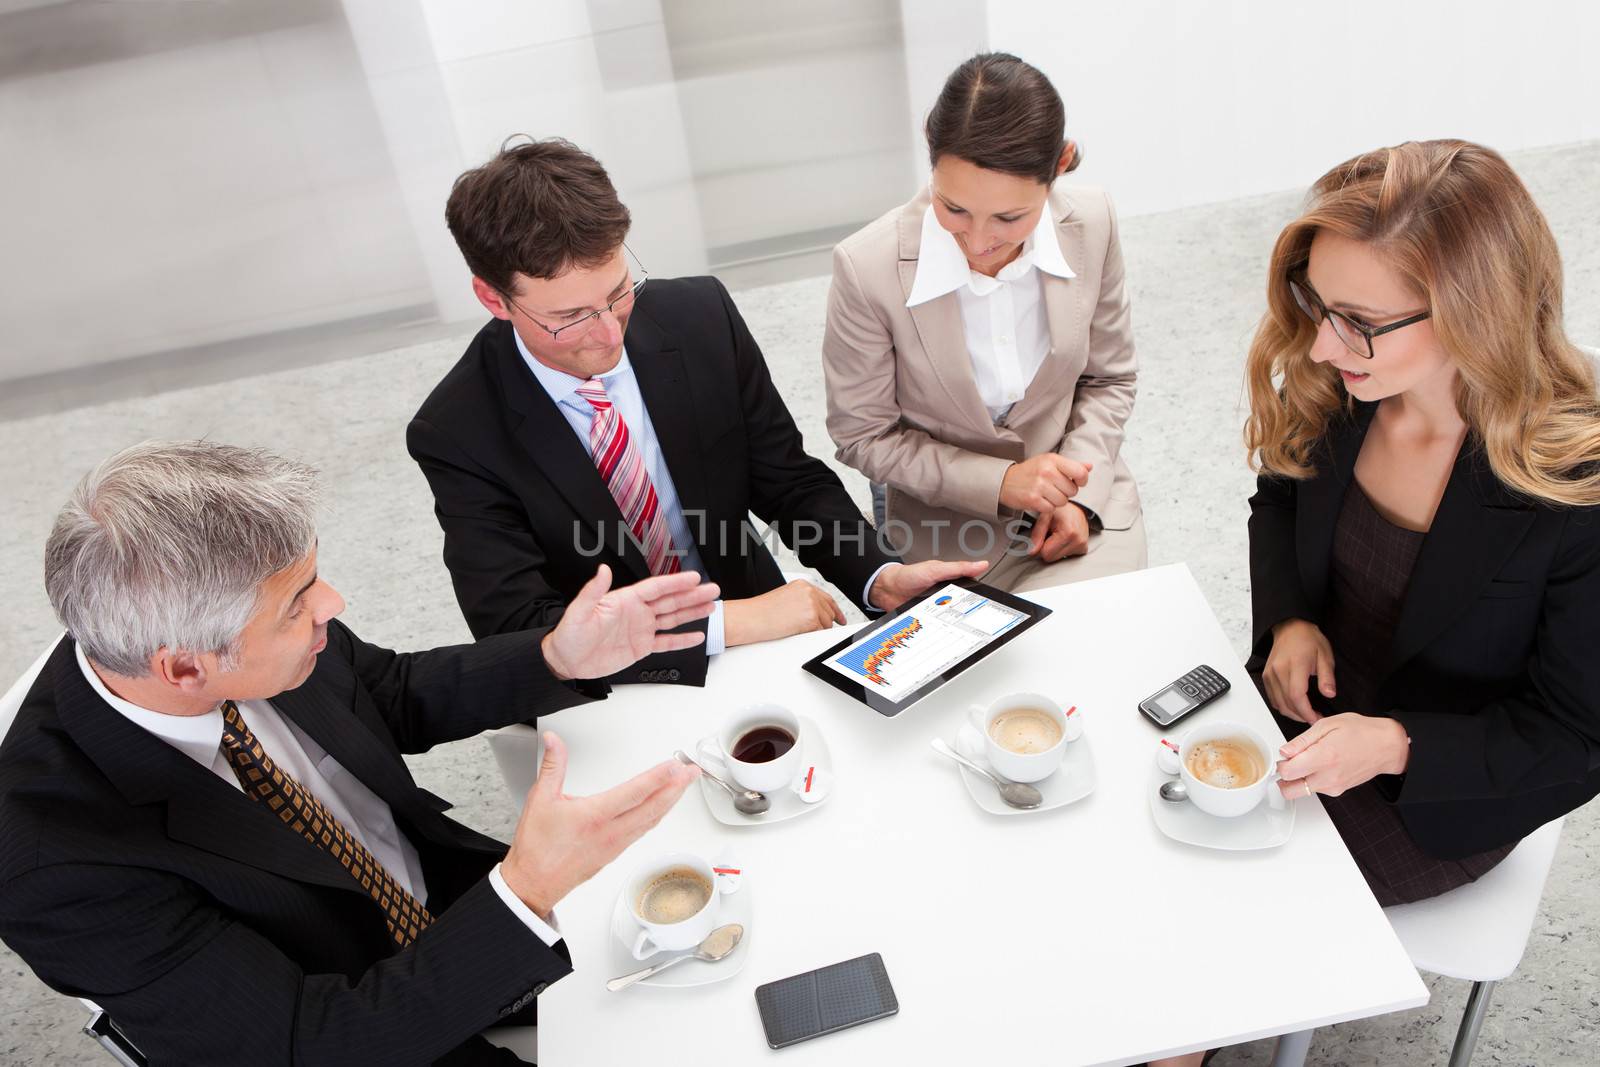 Business colleagues enjoying a coffee break smiling at something on the screen of a tablet held by one of the men